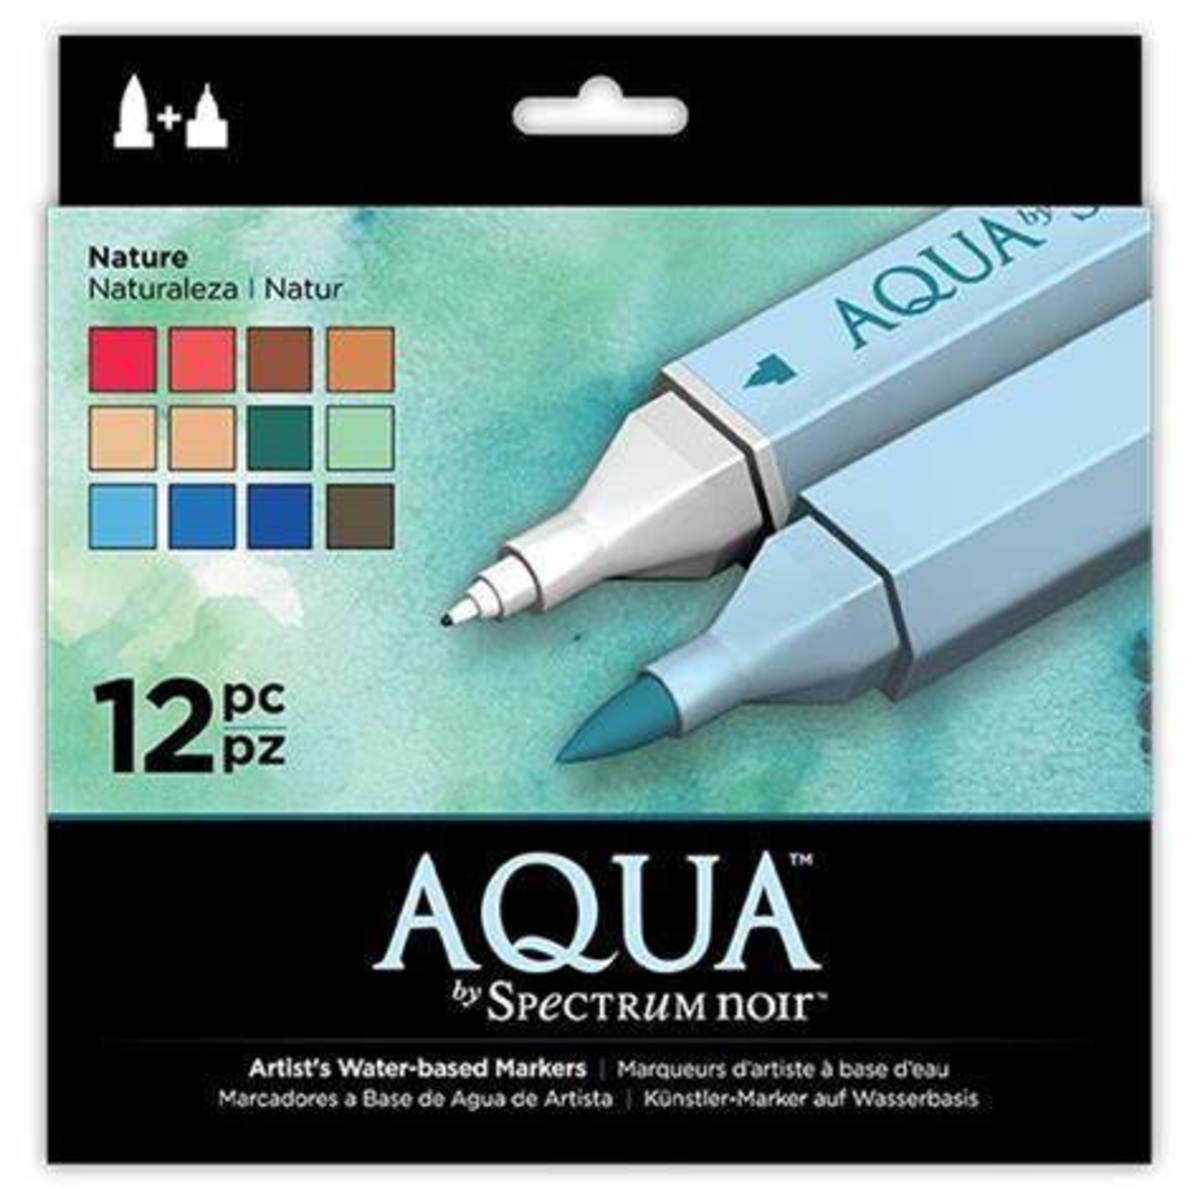 The Aqua pens are waterolor pens that will not disappoint.